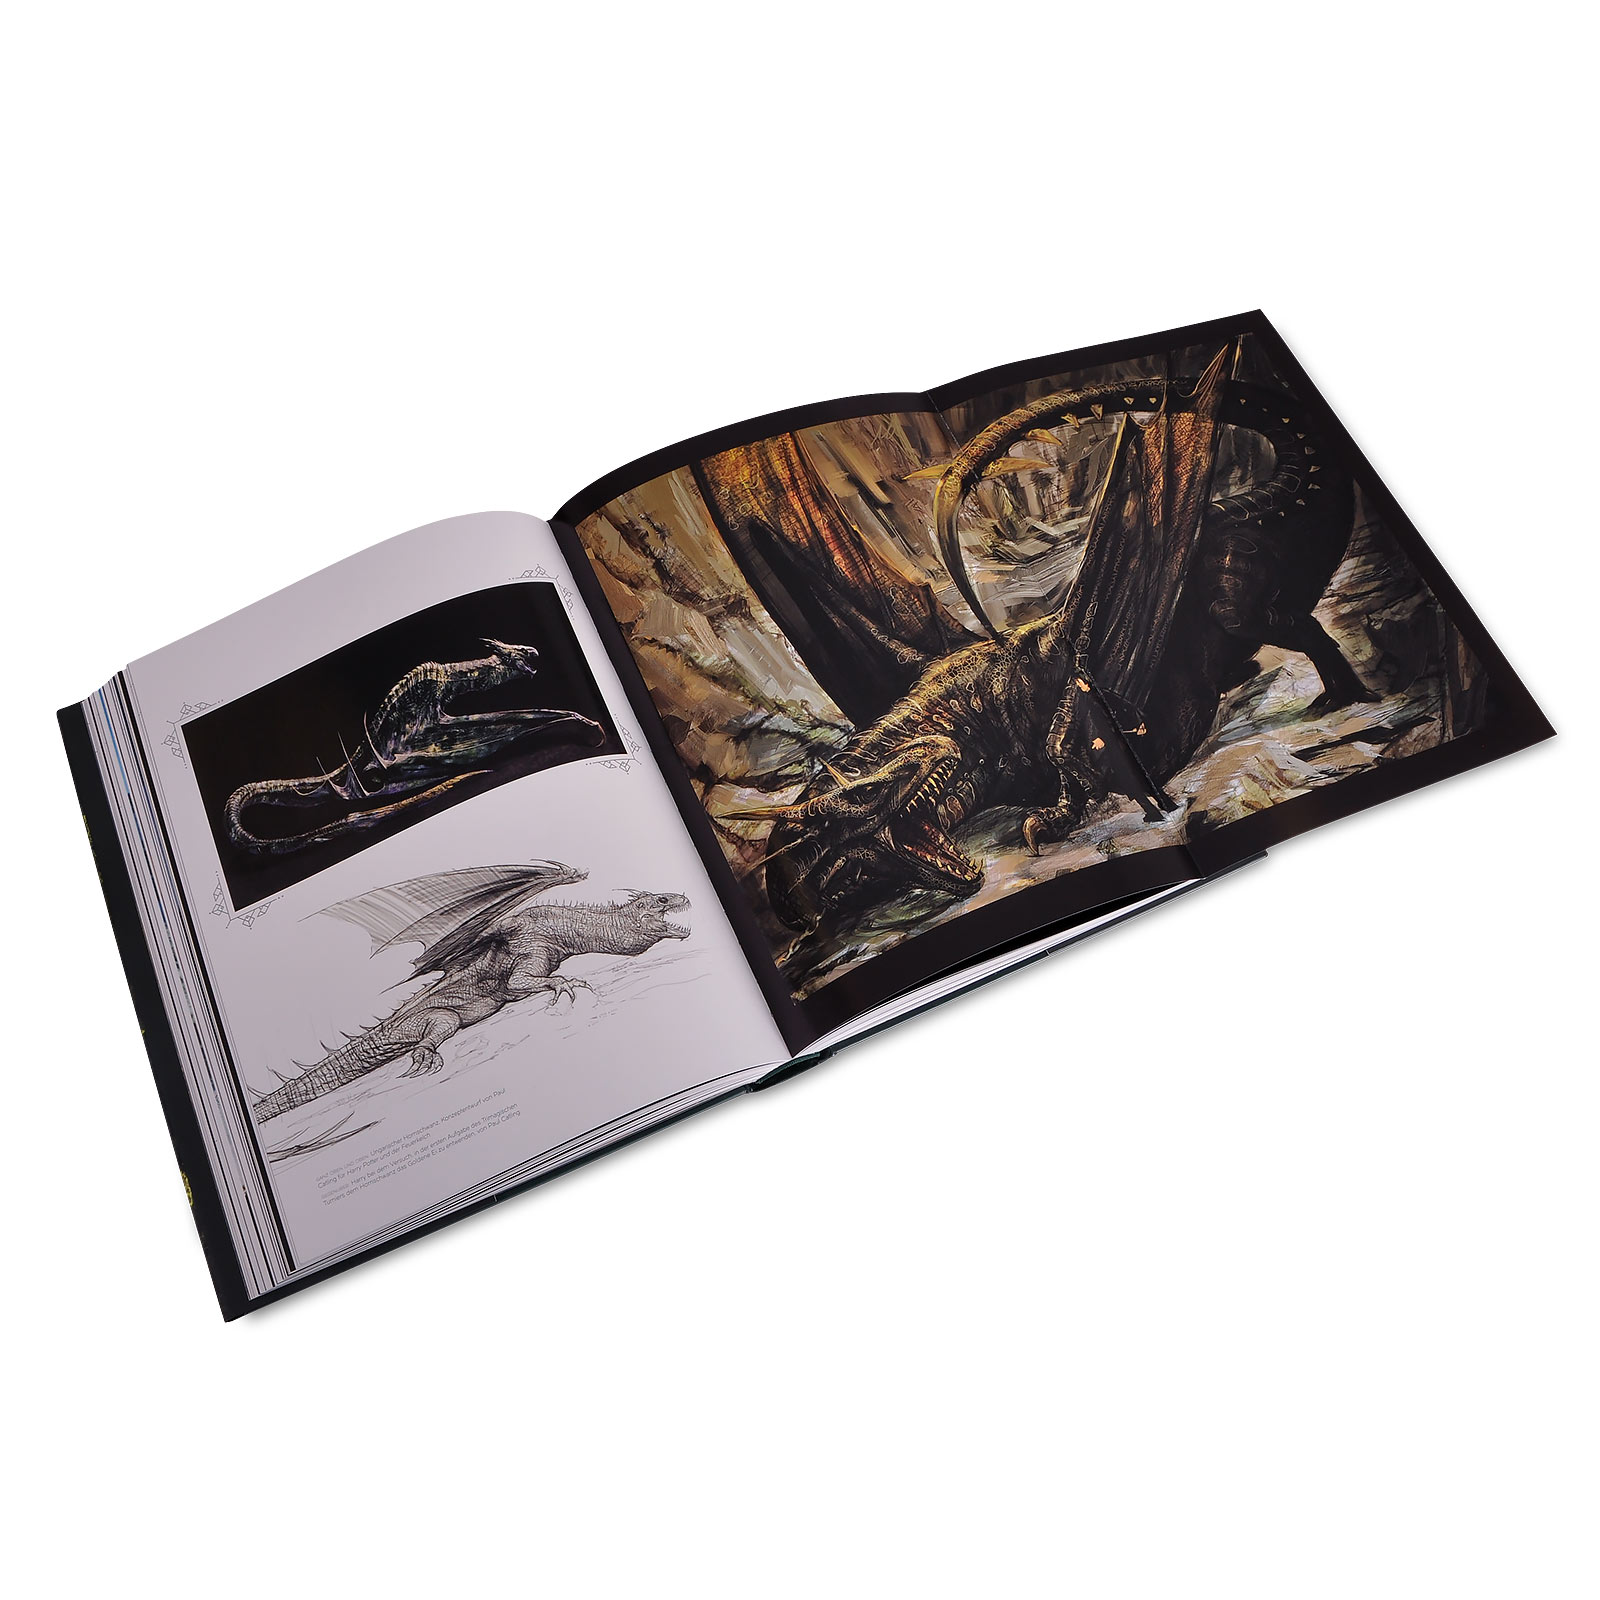 The Art of Harry Potter - The Big Harry Potter Book